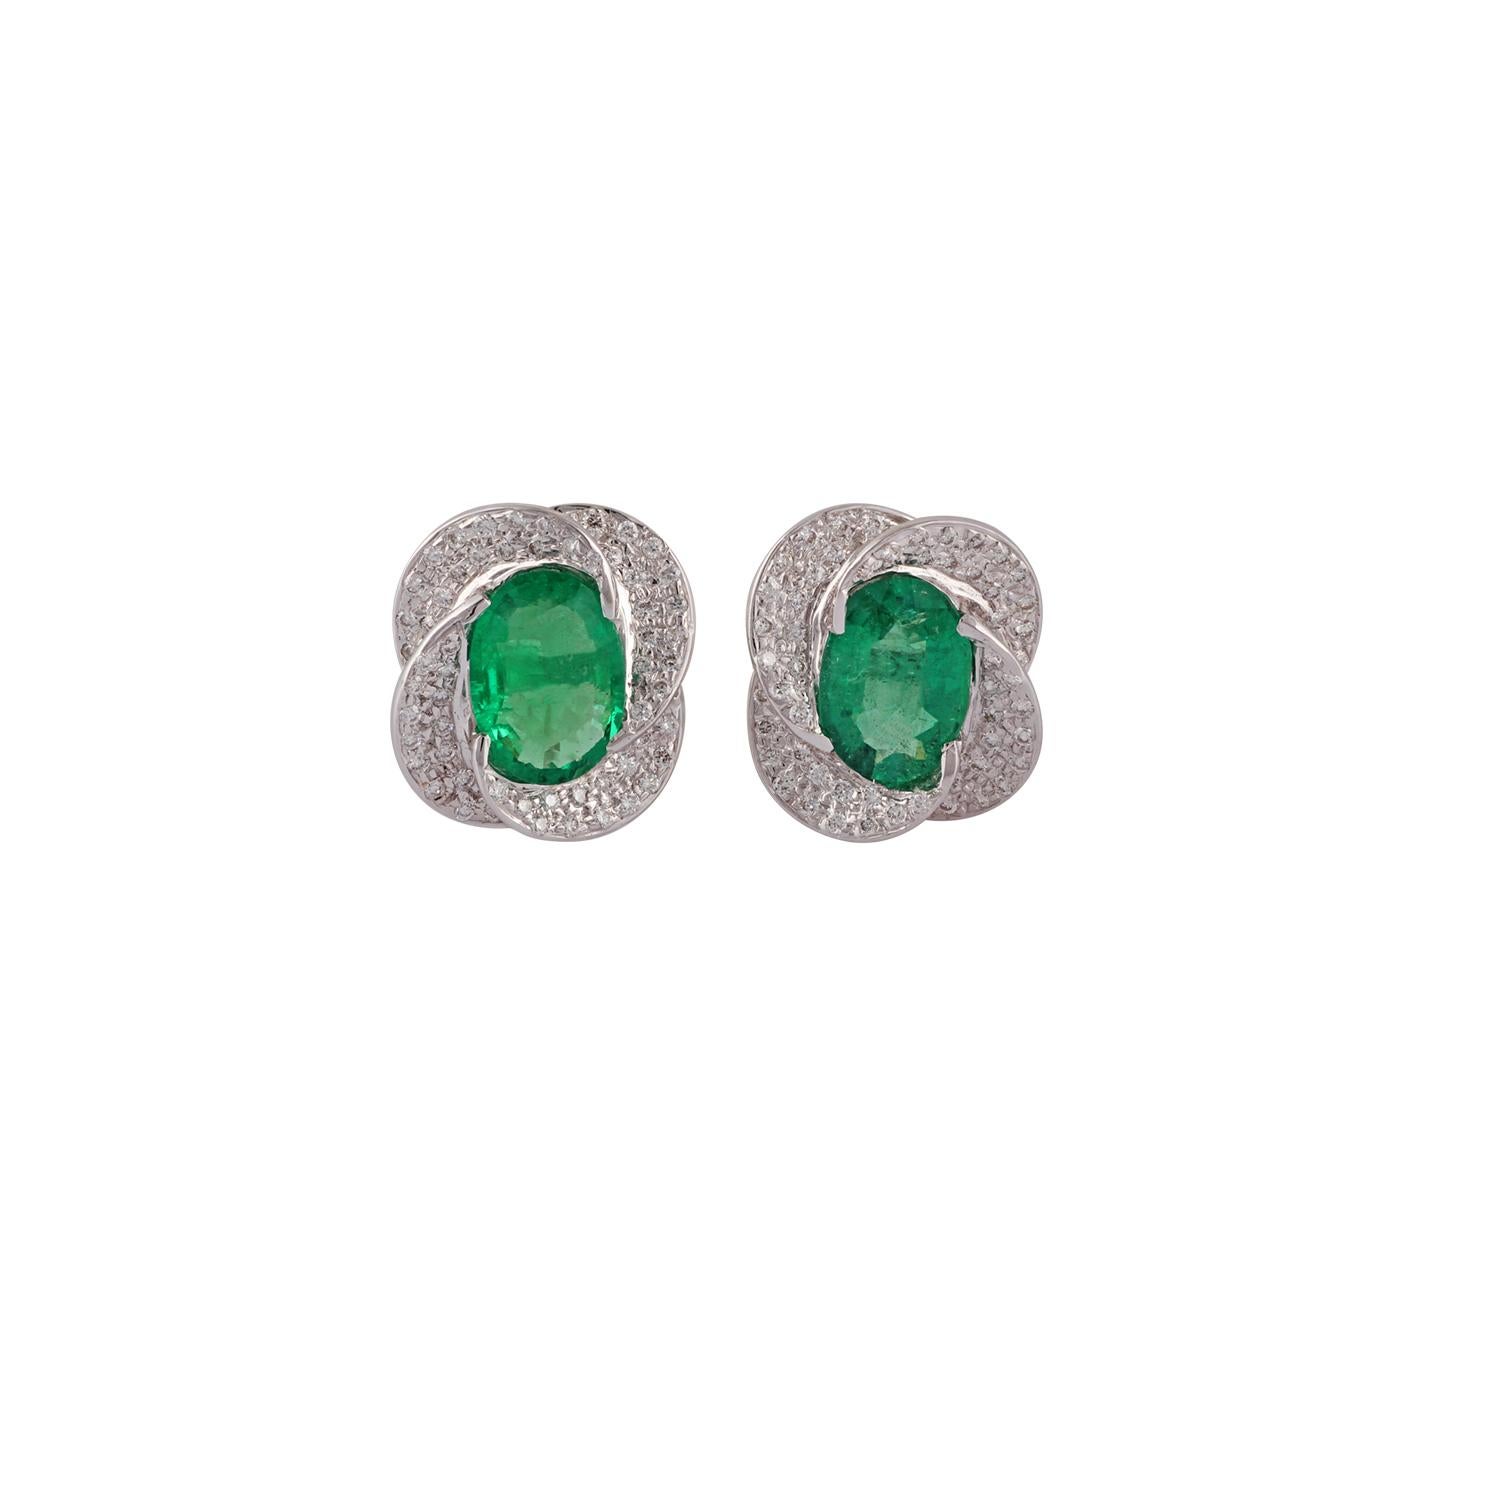 These are an elegant emerald & diamond earrings pair studded in 18k white gold features 2 pieces of oval shaped emeralds weight 5.40 carat with round shaped brilliant cut diamonds weight 1.68 carat, these earrings entirely studded in 18k white gold